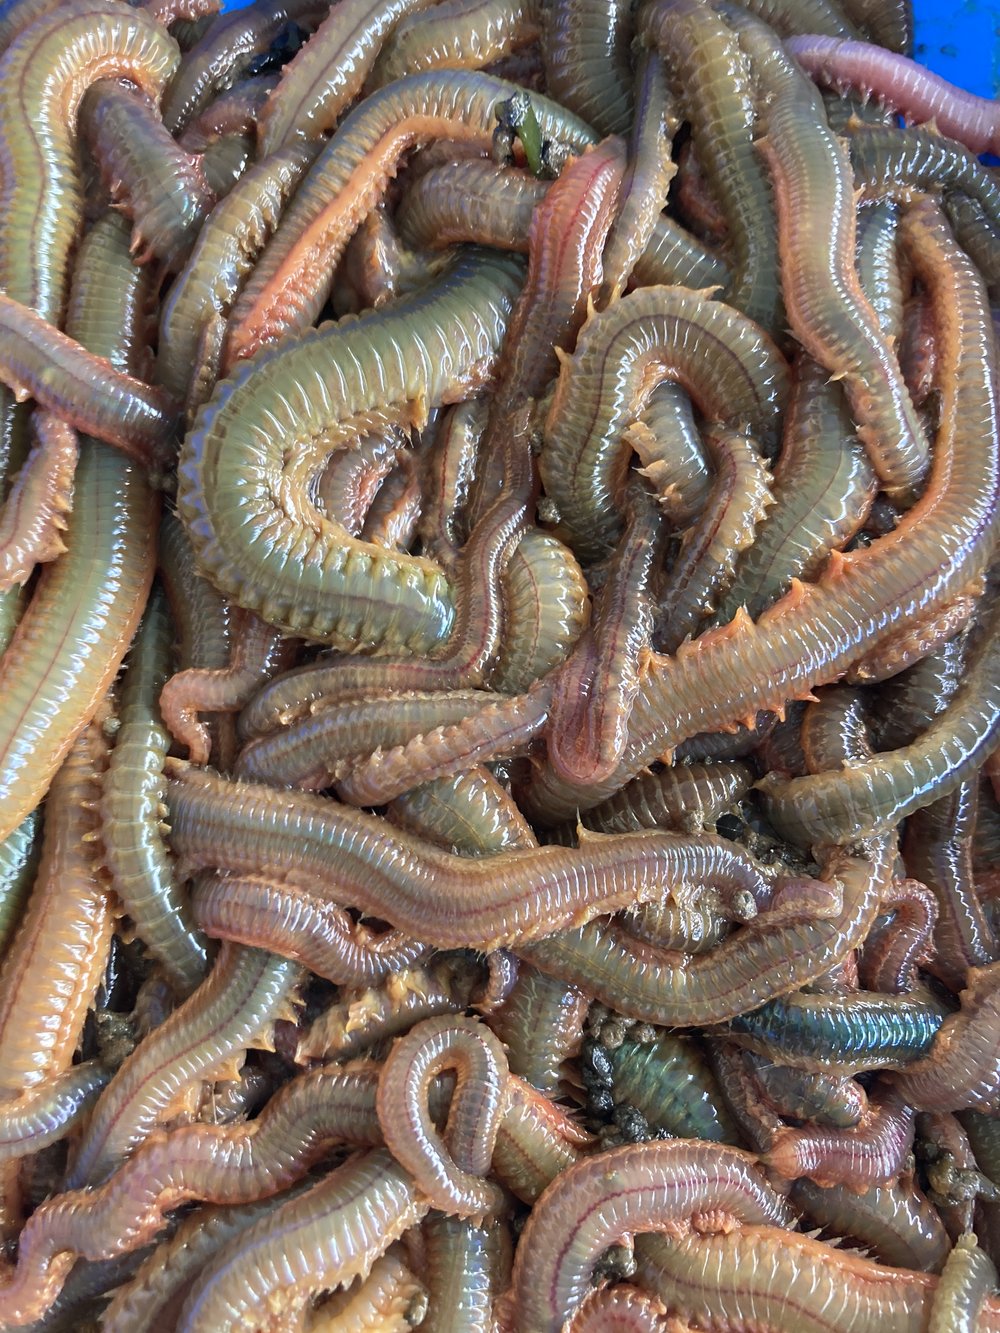 Types of Fishing Worms - Senko Worms - Ribbon, Paddle, Curly, Straight